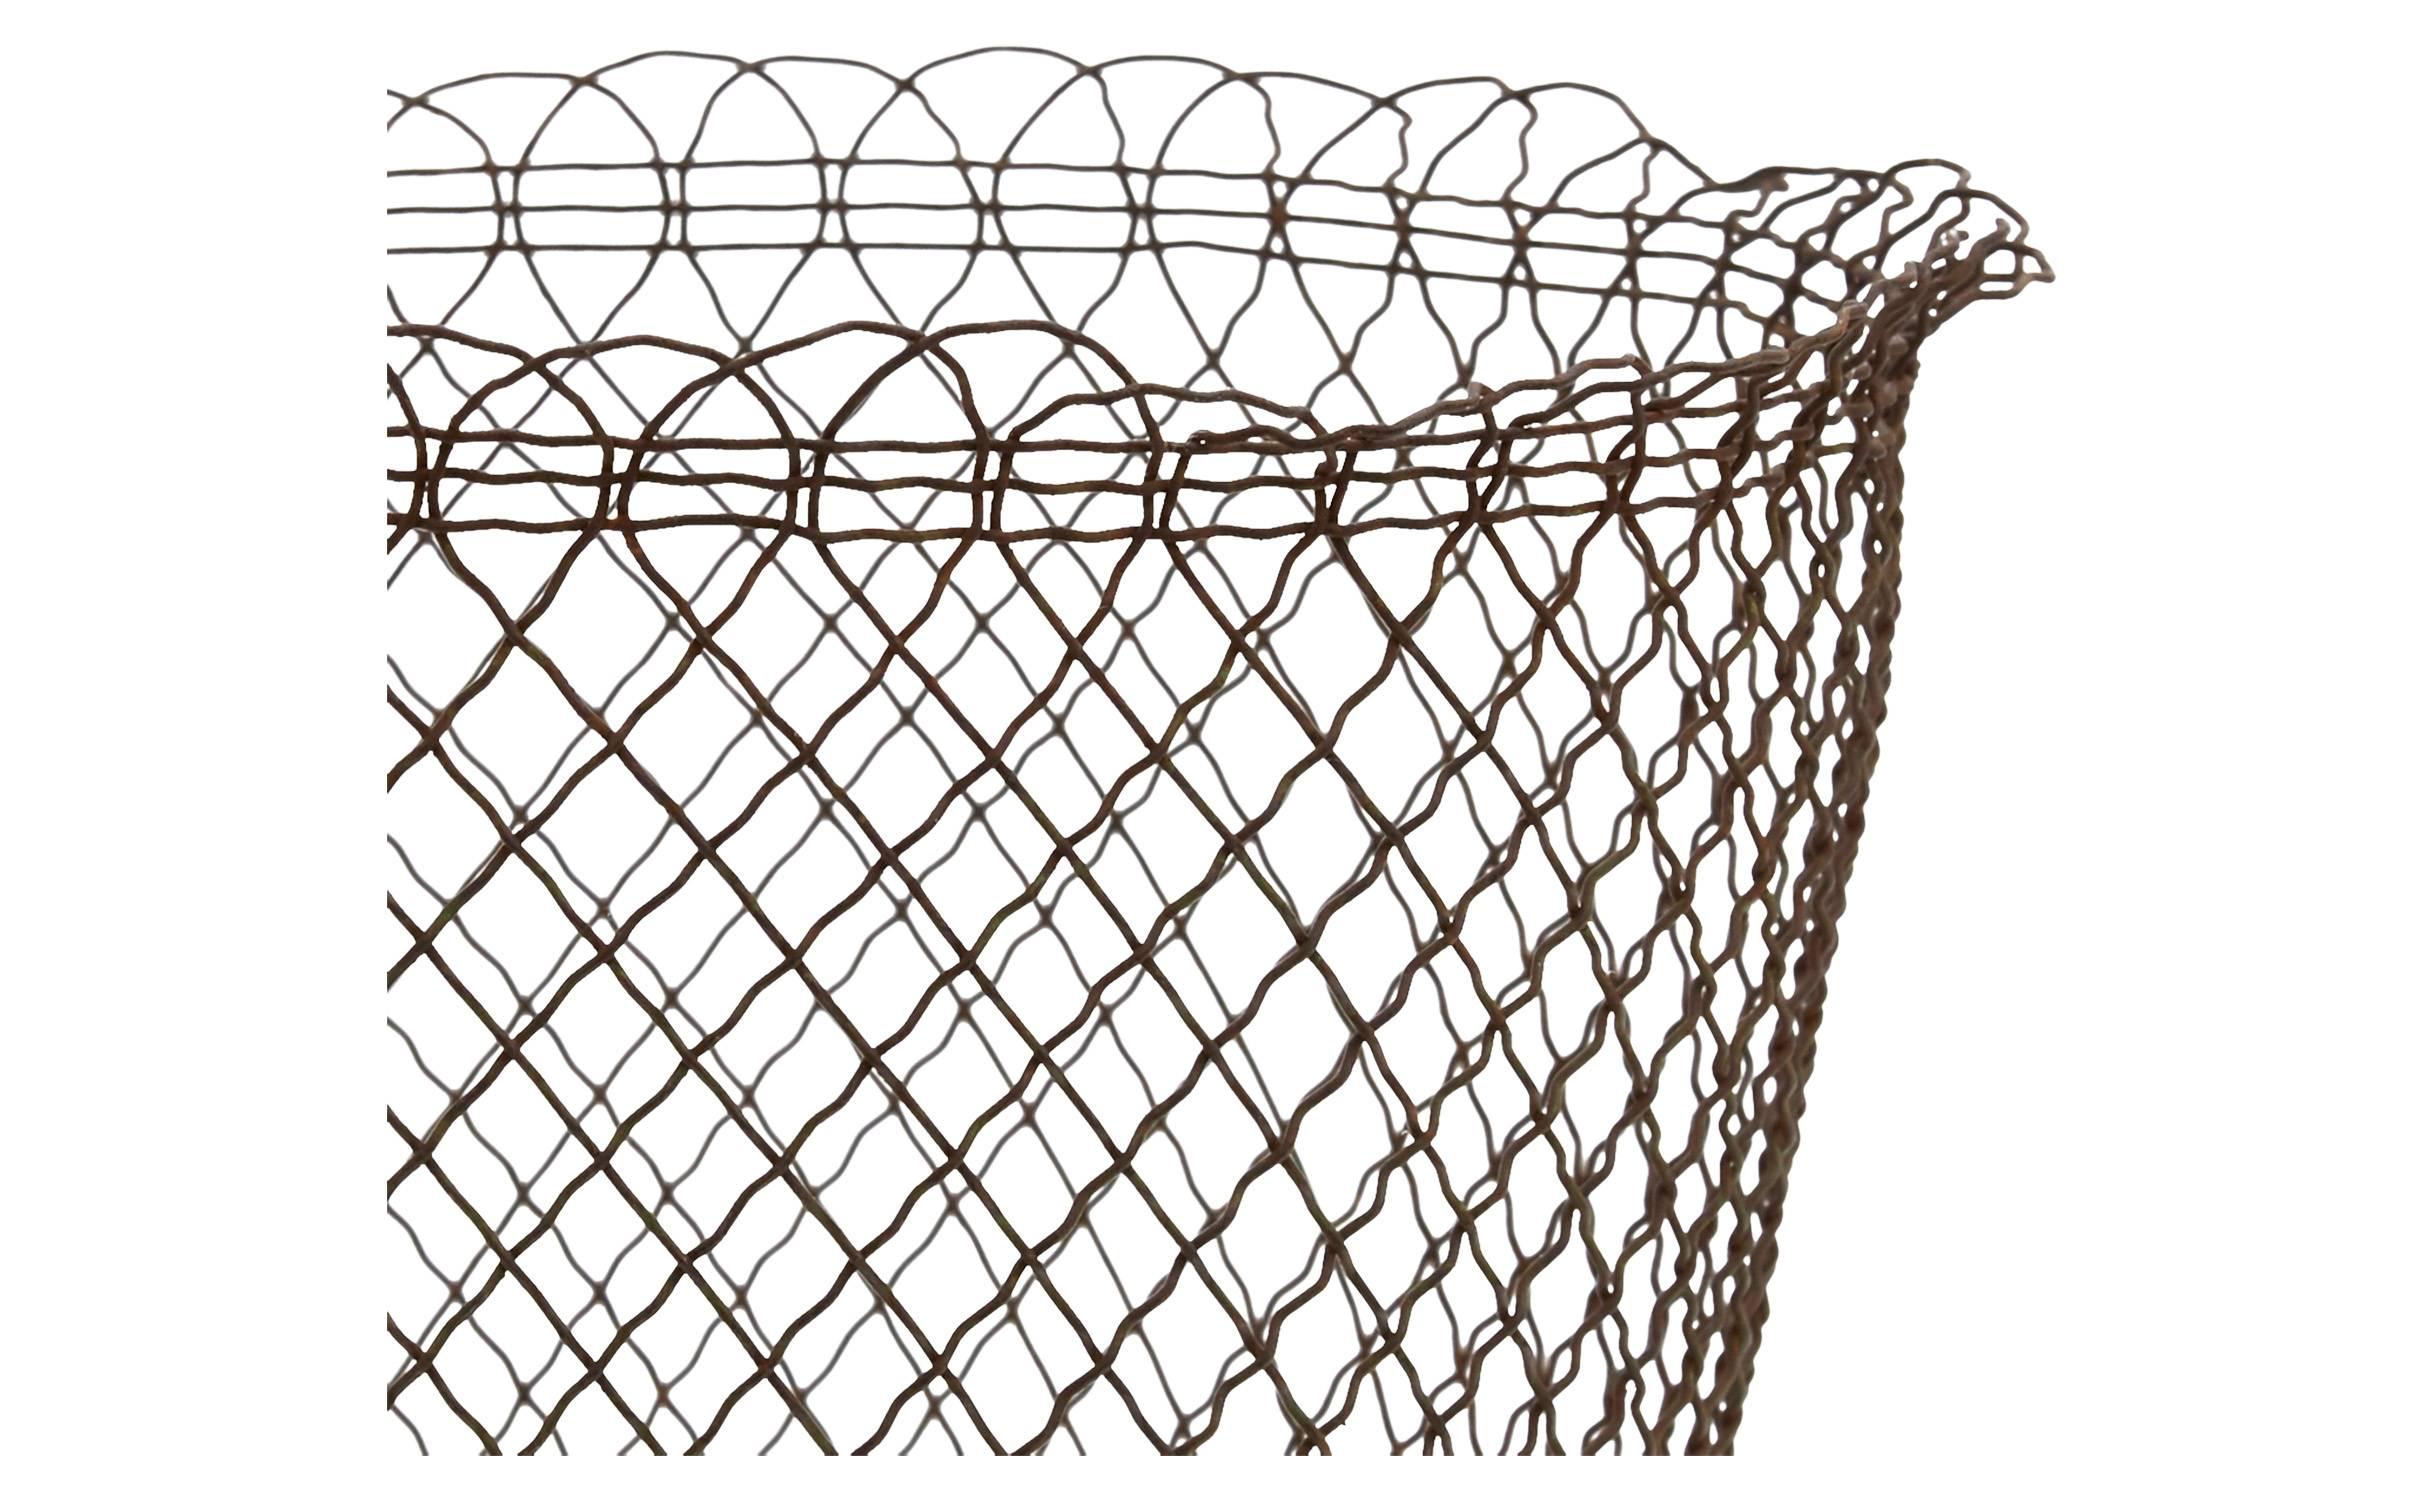 • Wire frame
• Late 19th century
• Spain
• Measure: 11.25 diameter x 12' height.